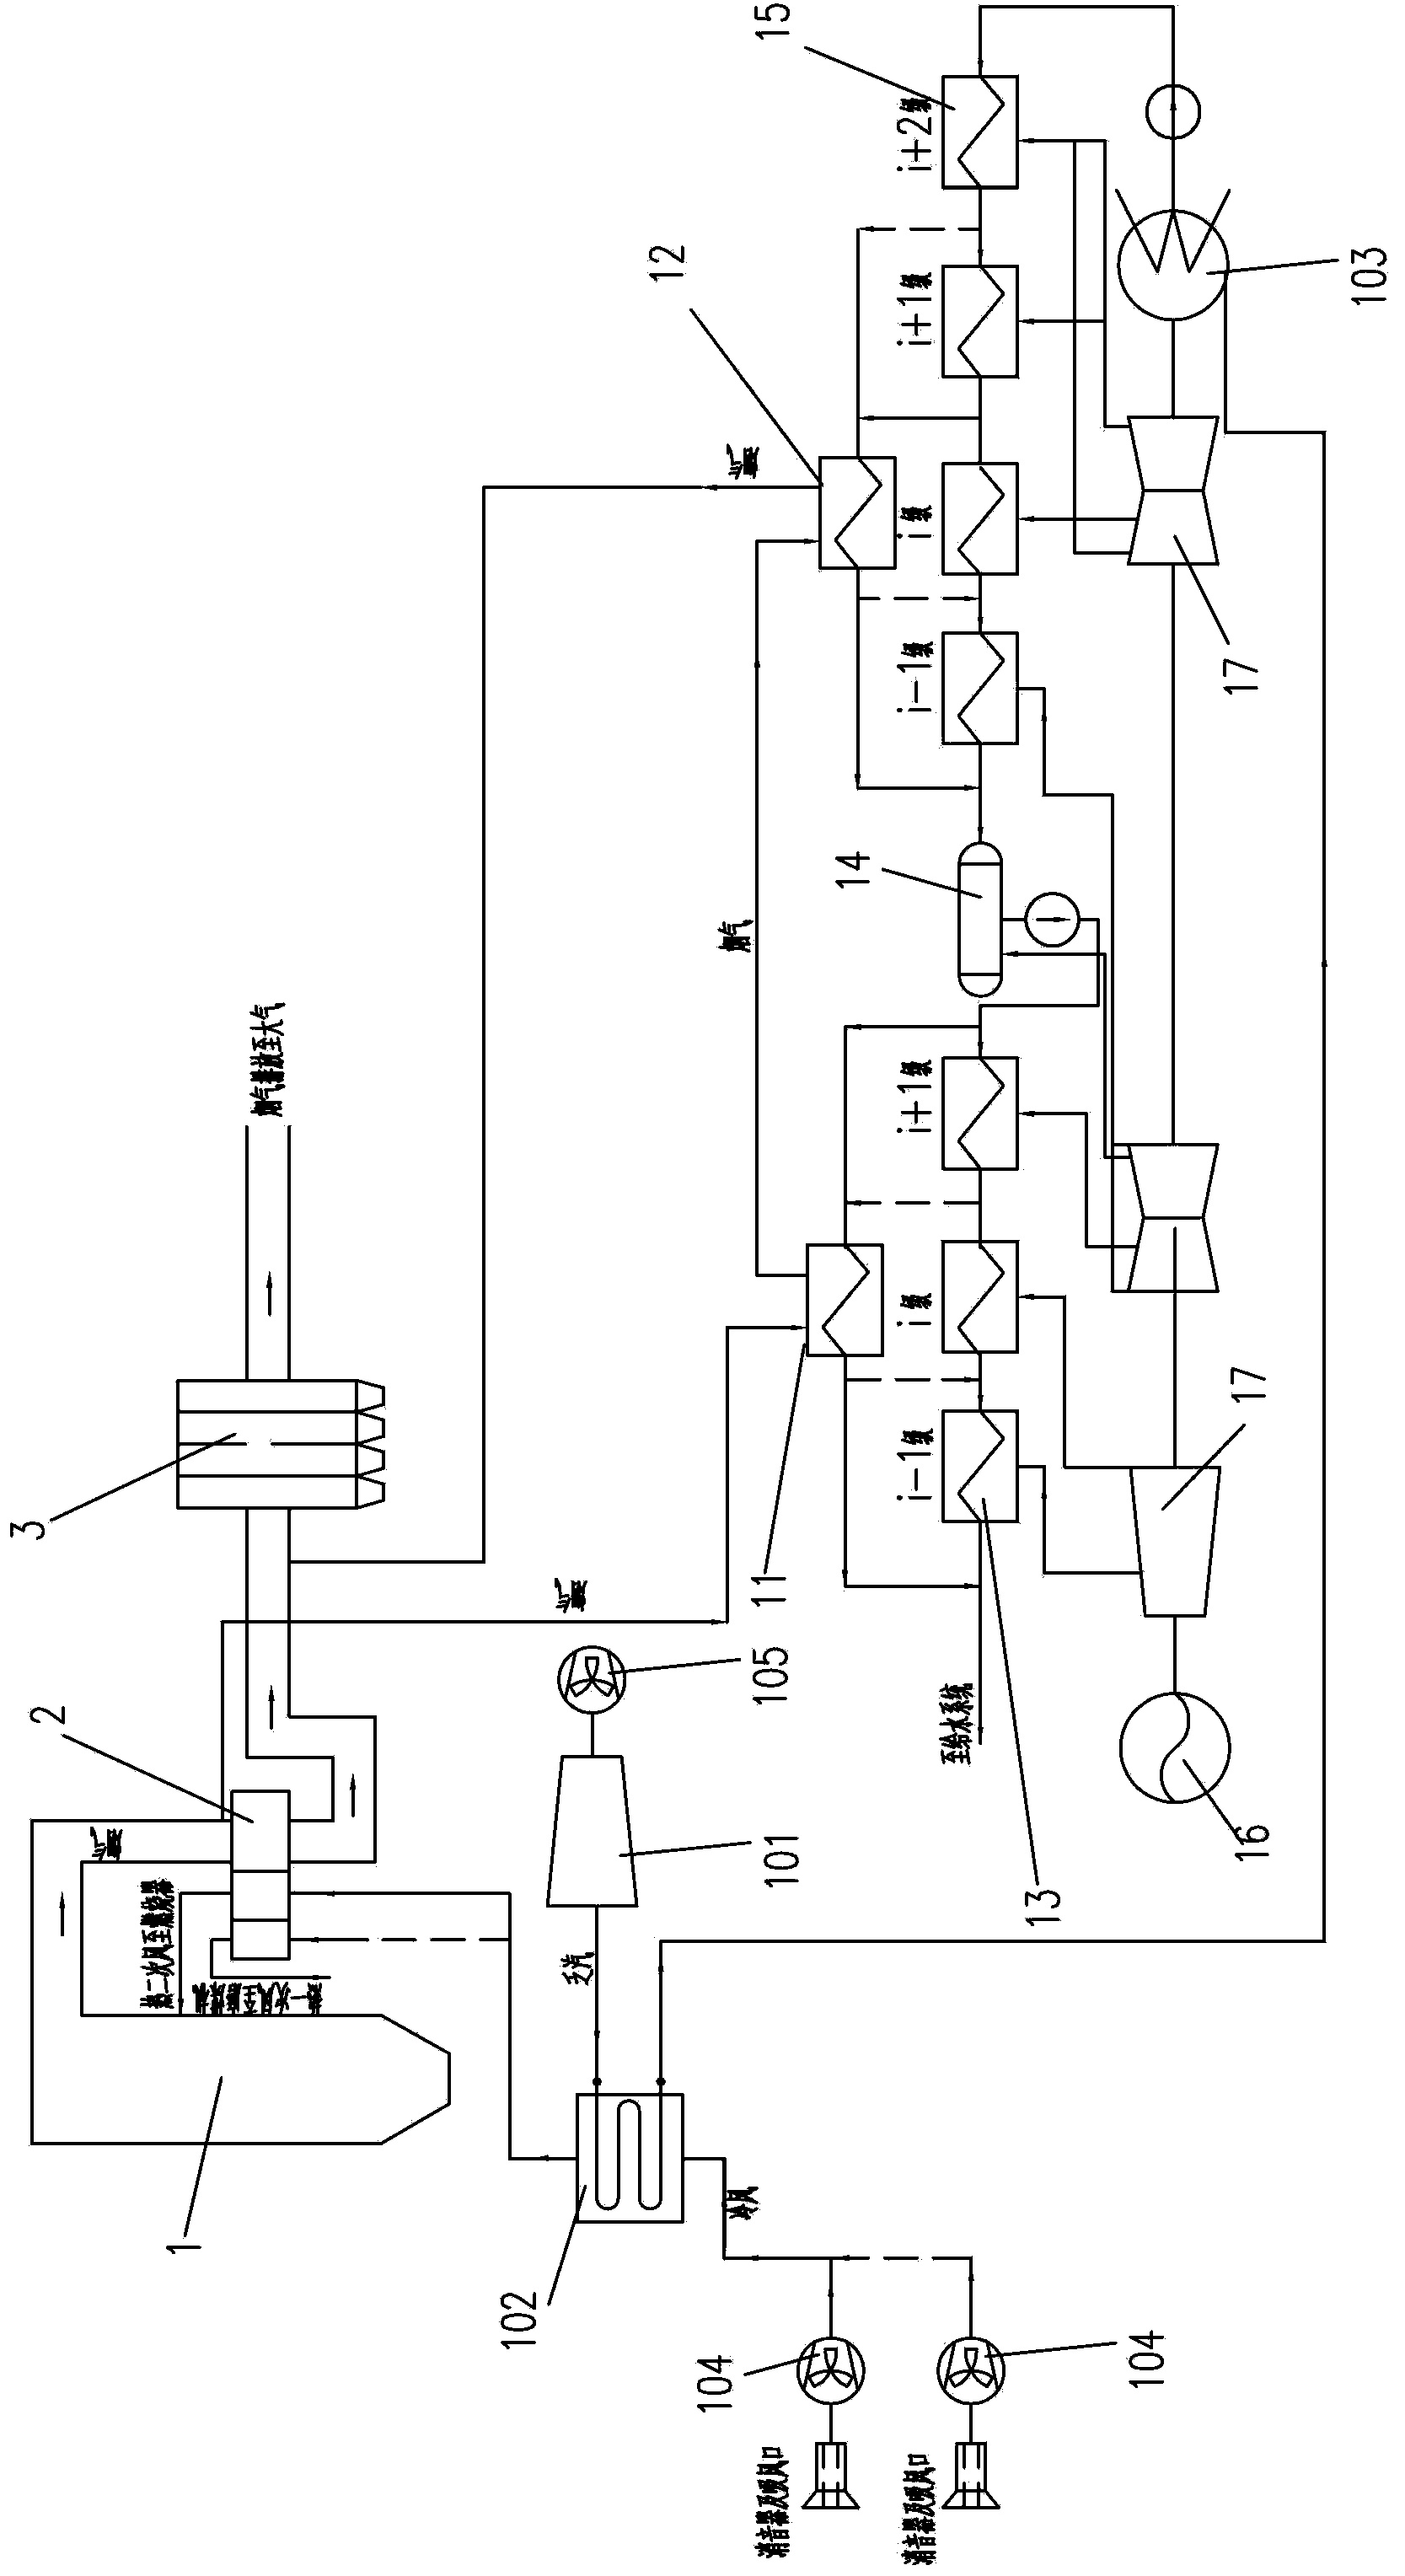 Steam exhaust cooling system of driving steam turbine of thermal power plant and thermal power unit